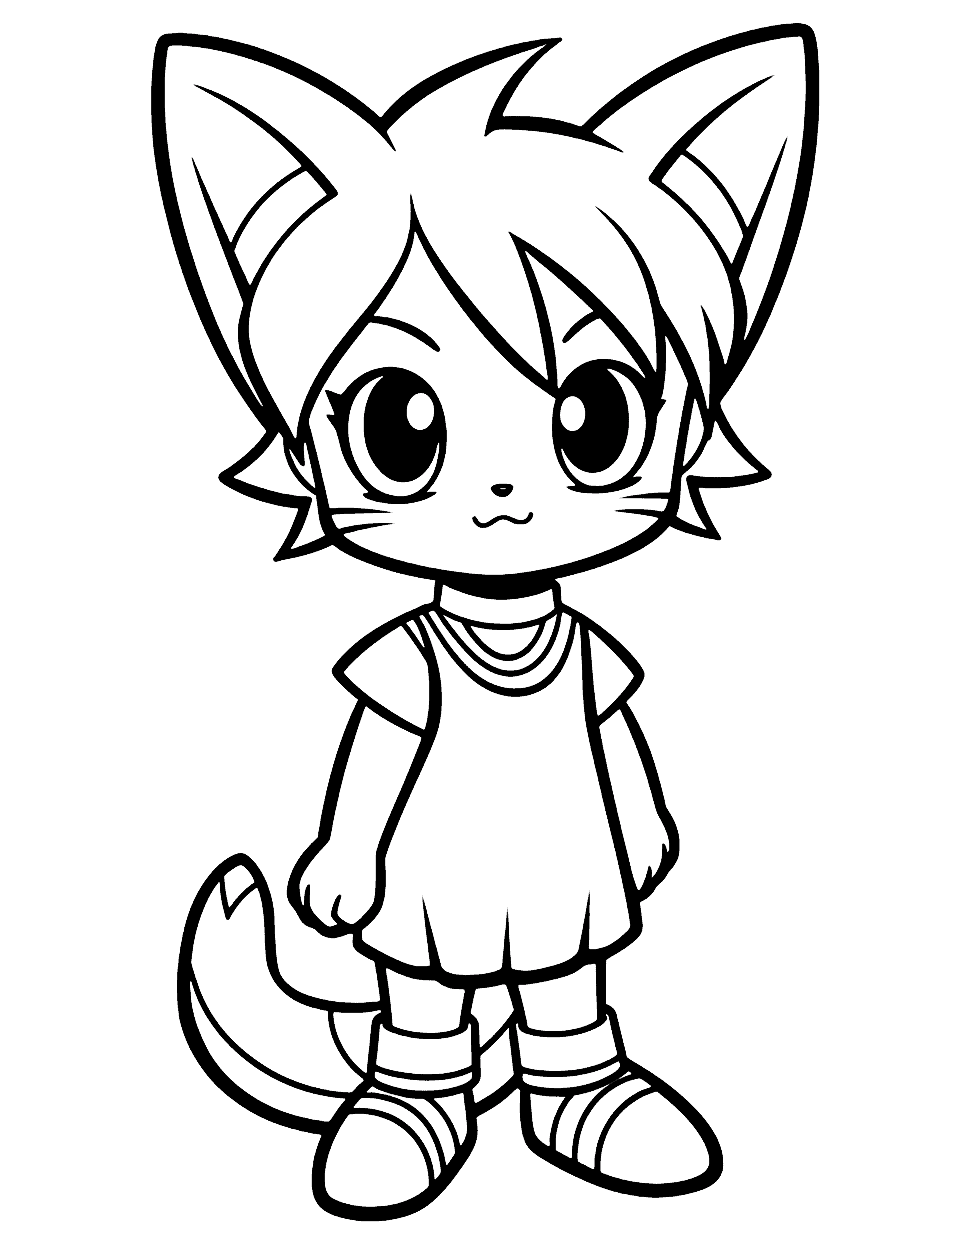 Easy Anime Cat Coloring Page - An easy-to-color anime cat with big, curious eyes.